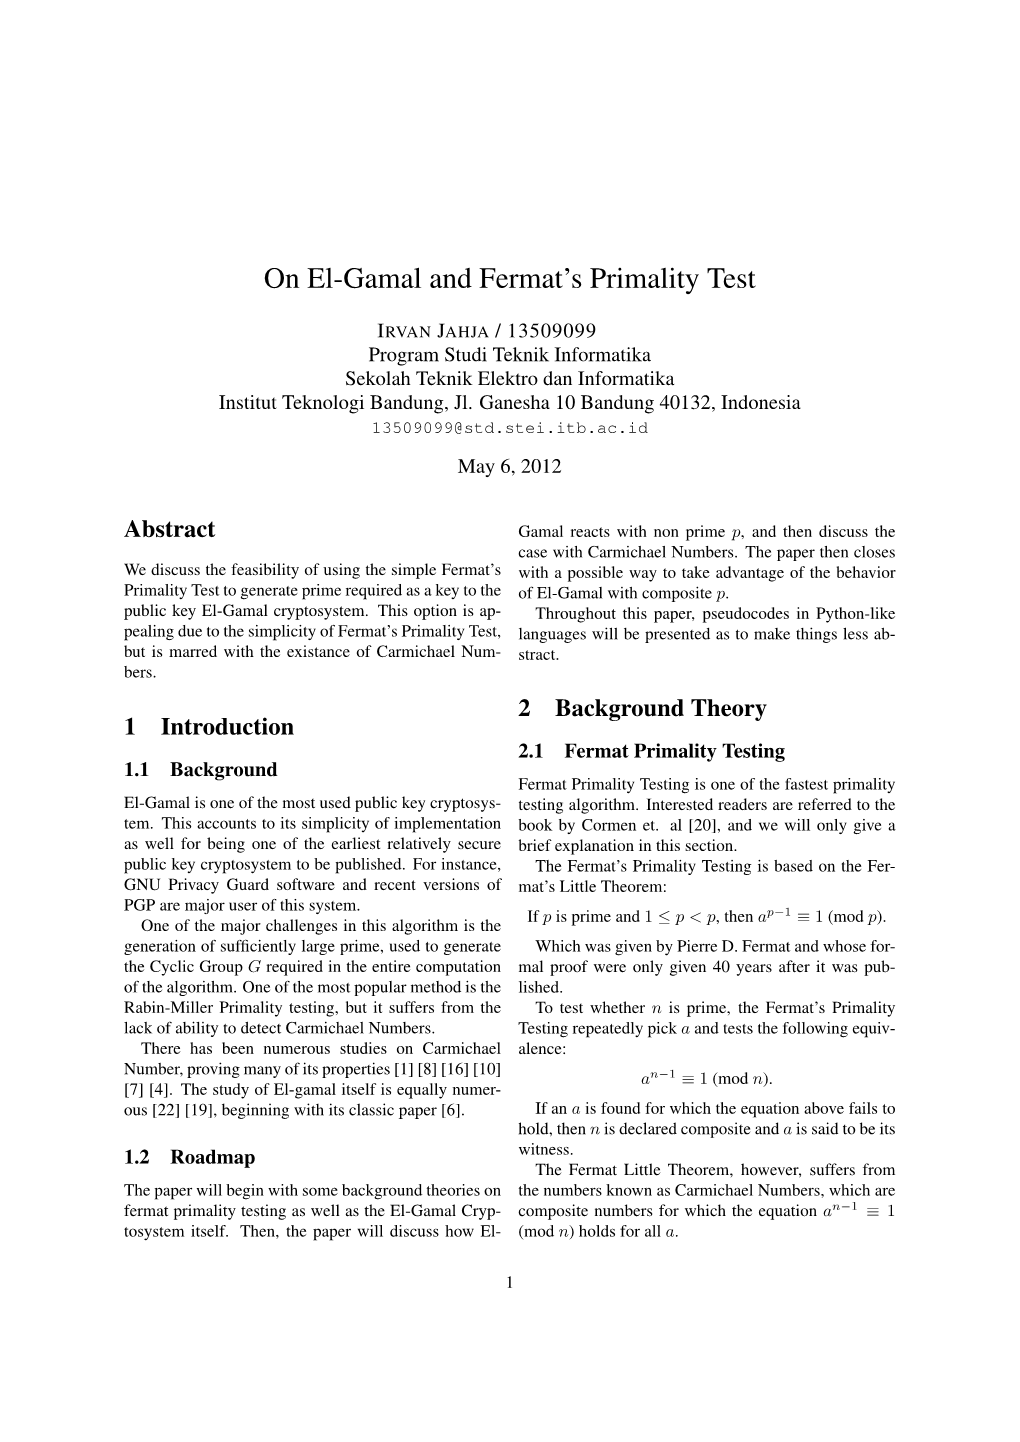 On El-Gamal and Fermat's Primality Test